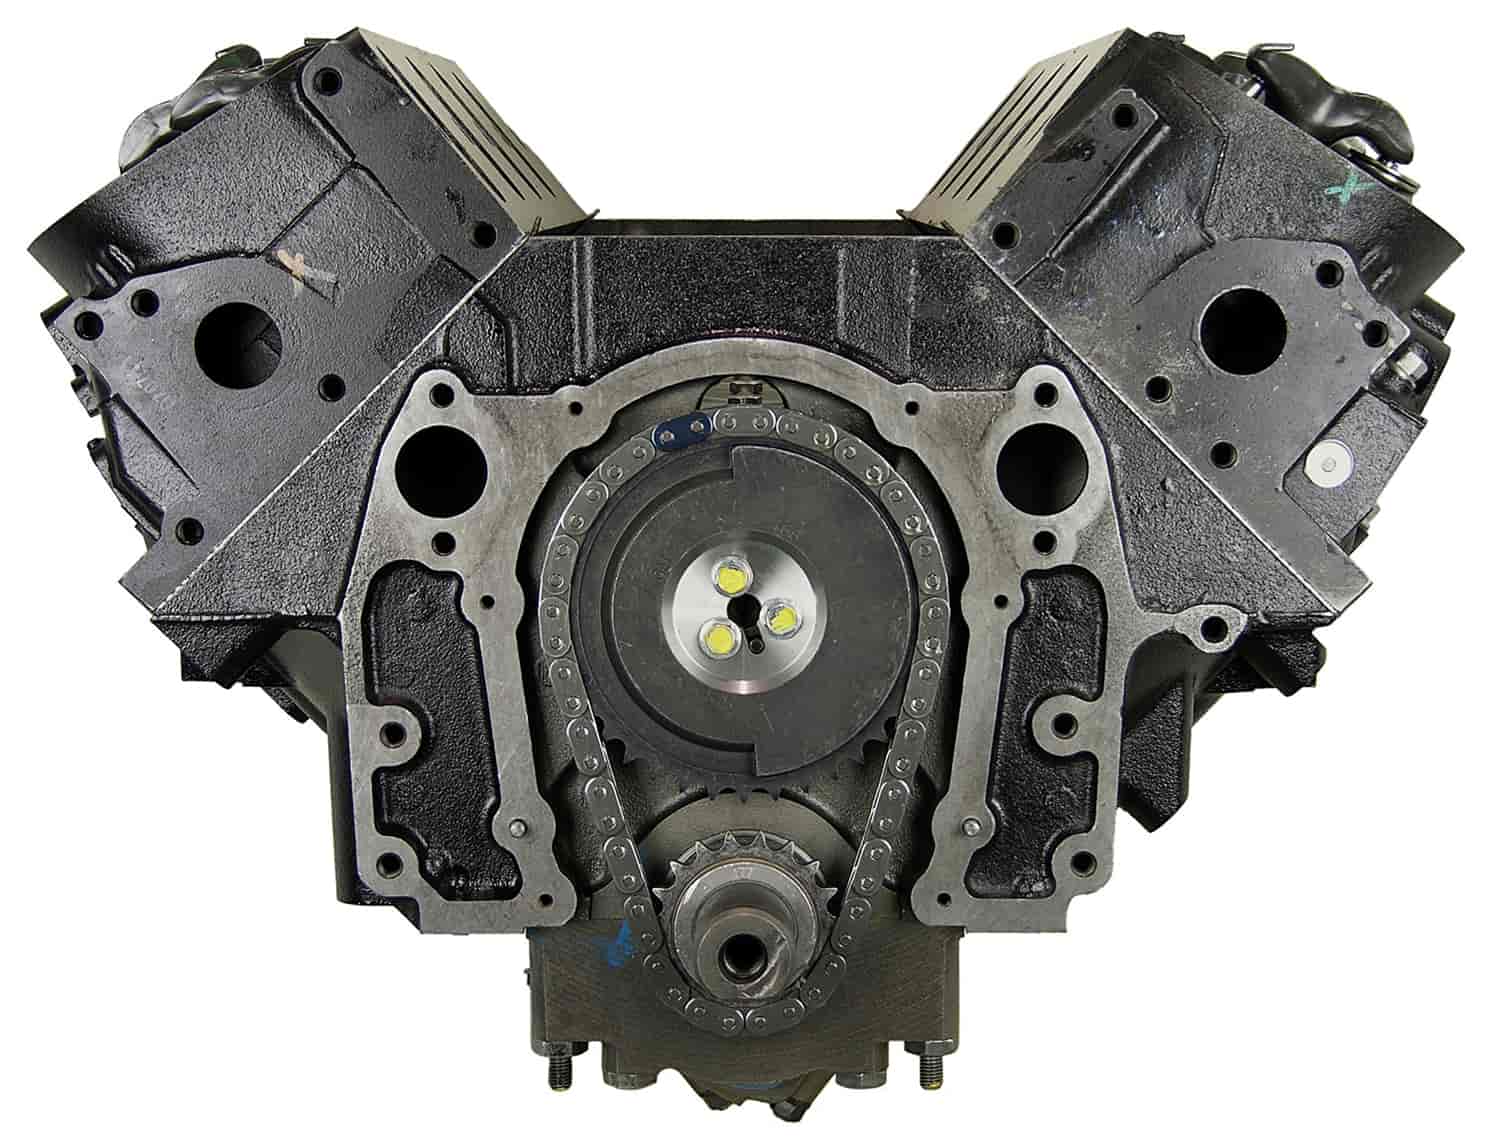 Remanufactured Crate Engine for 2004-2007 Chevy/GMC Truck, SUV,